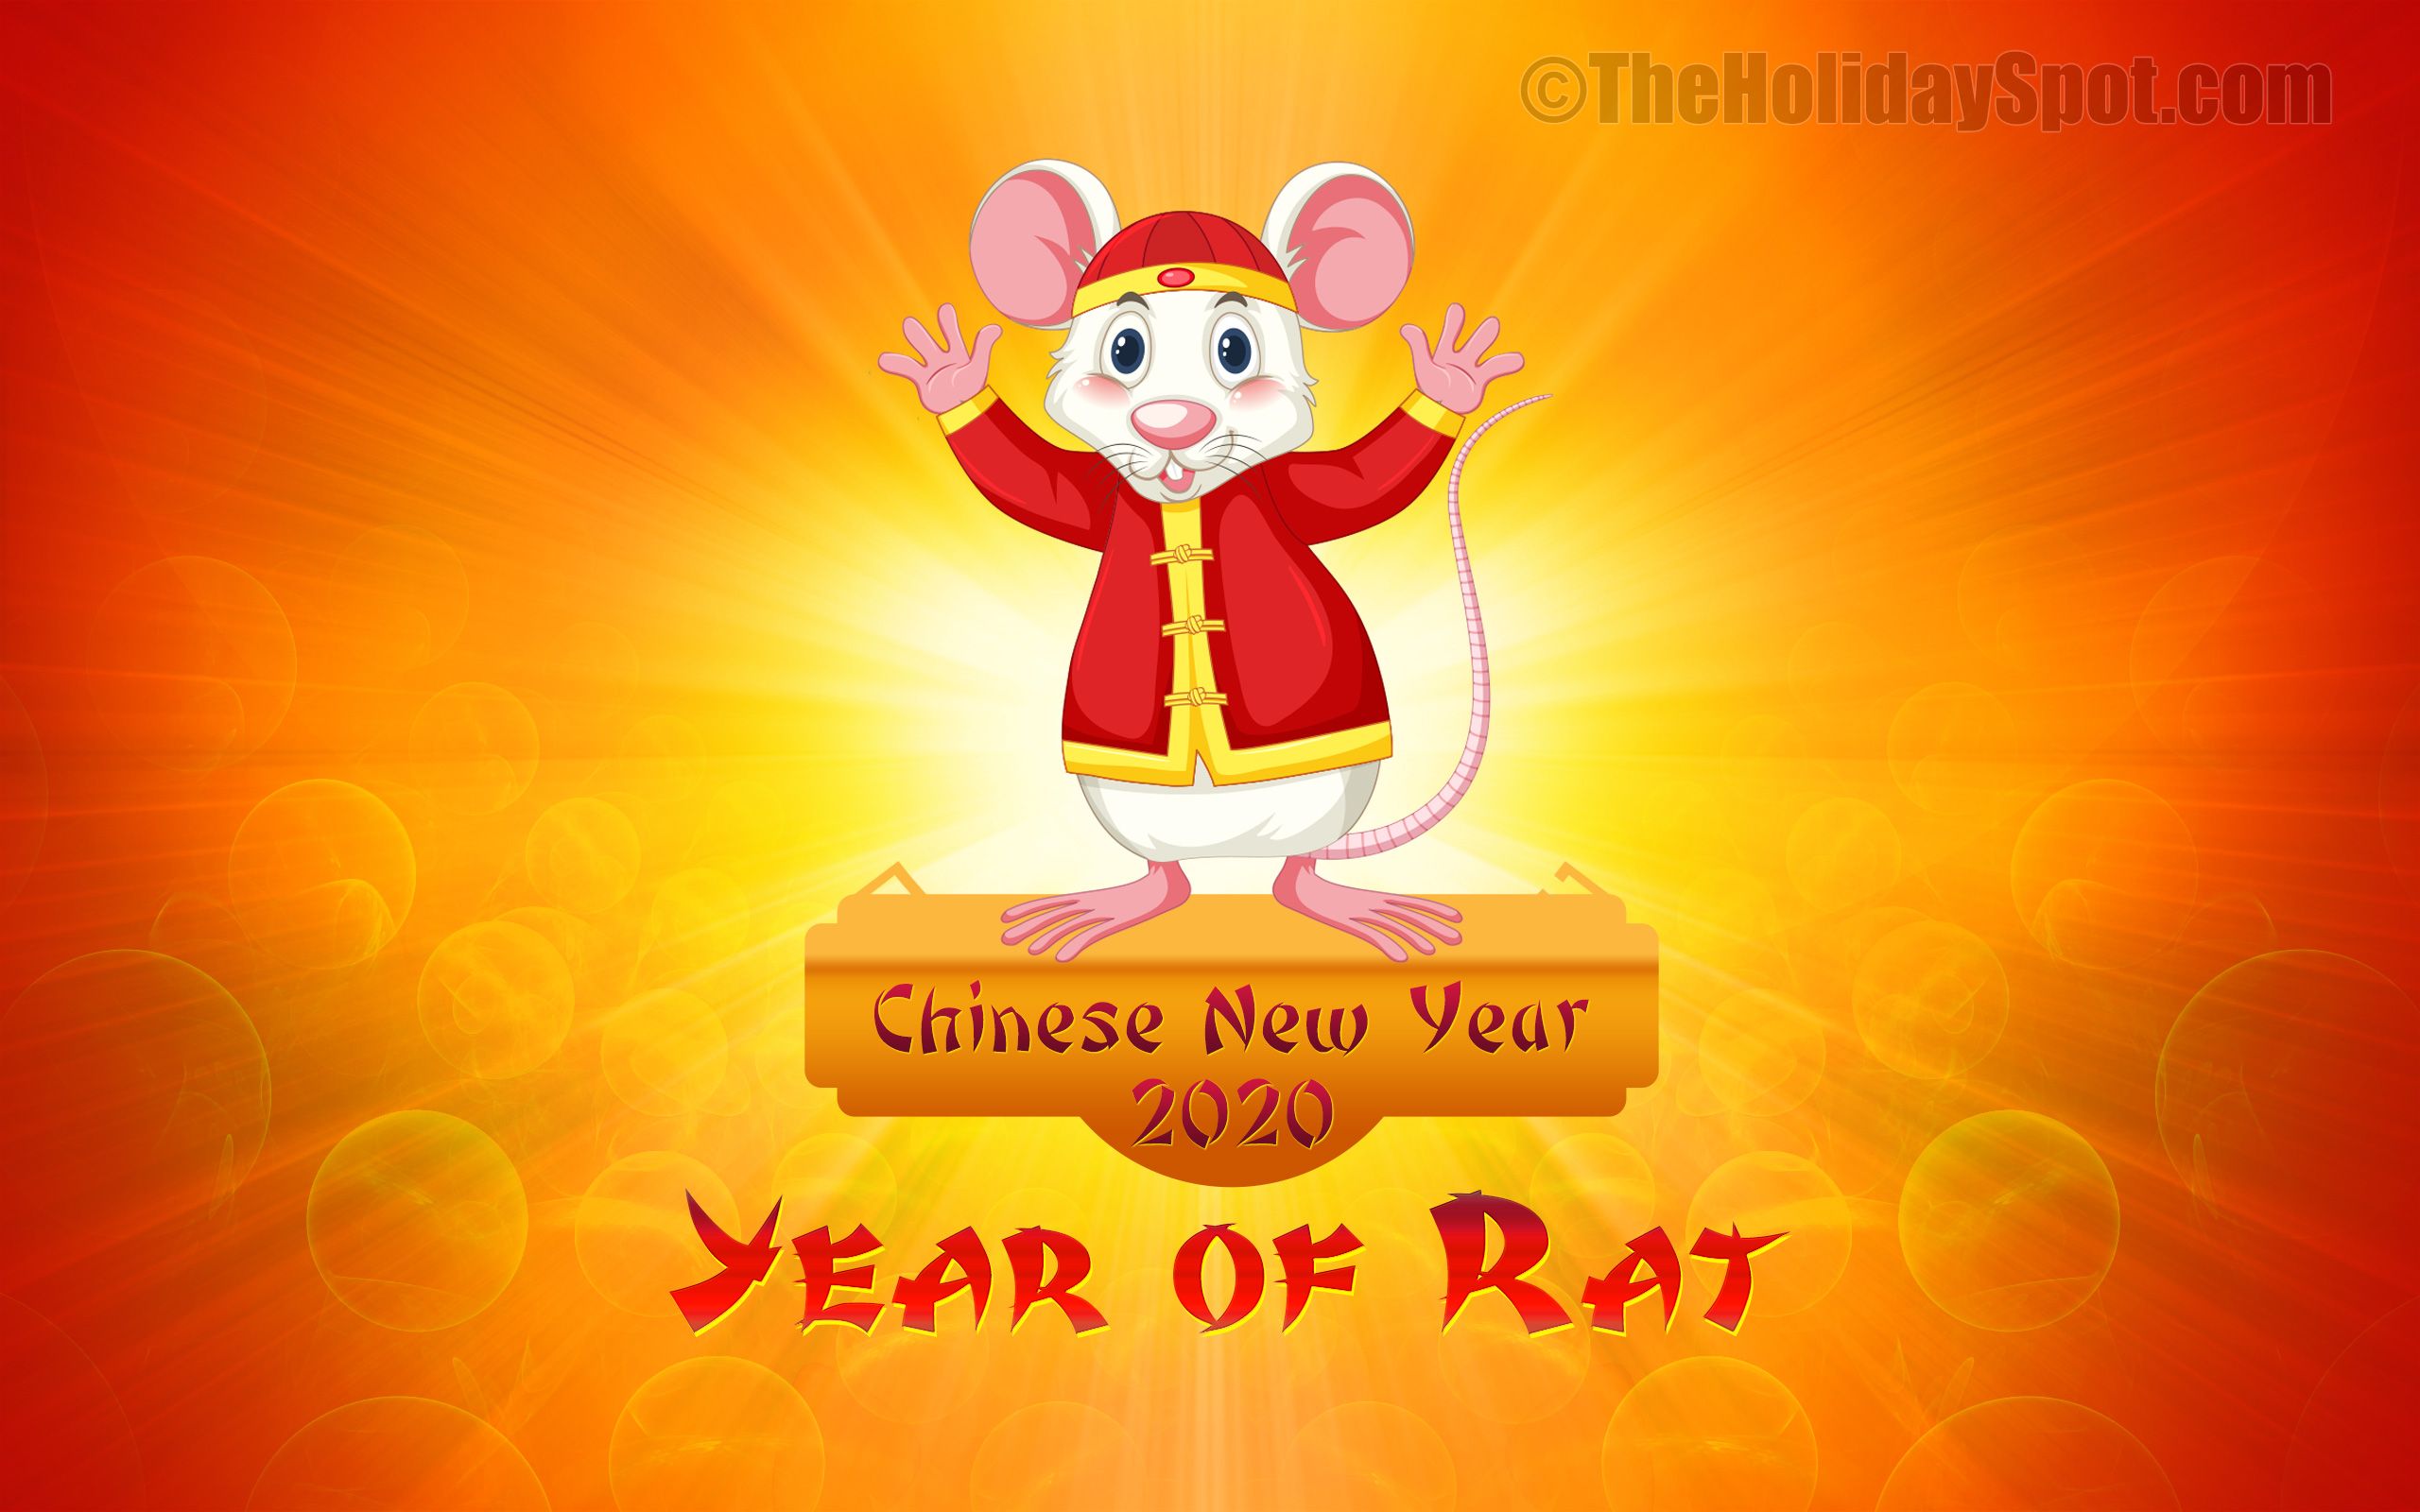 Chinese New Year Wallpaper 2022. Download Free HD Chinese New Year Image